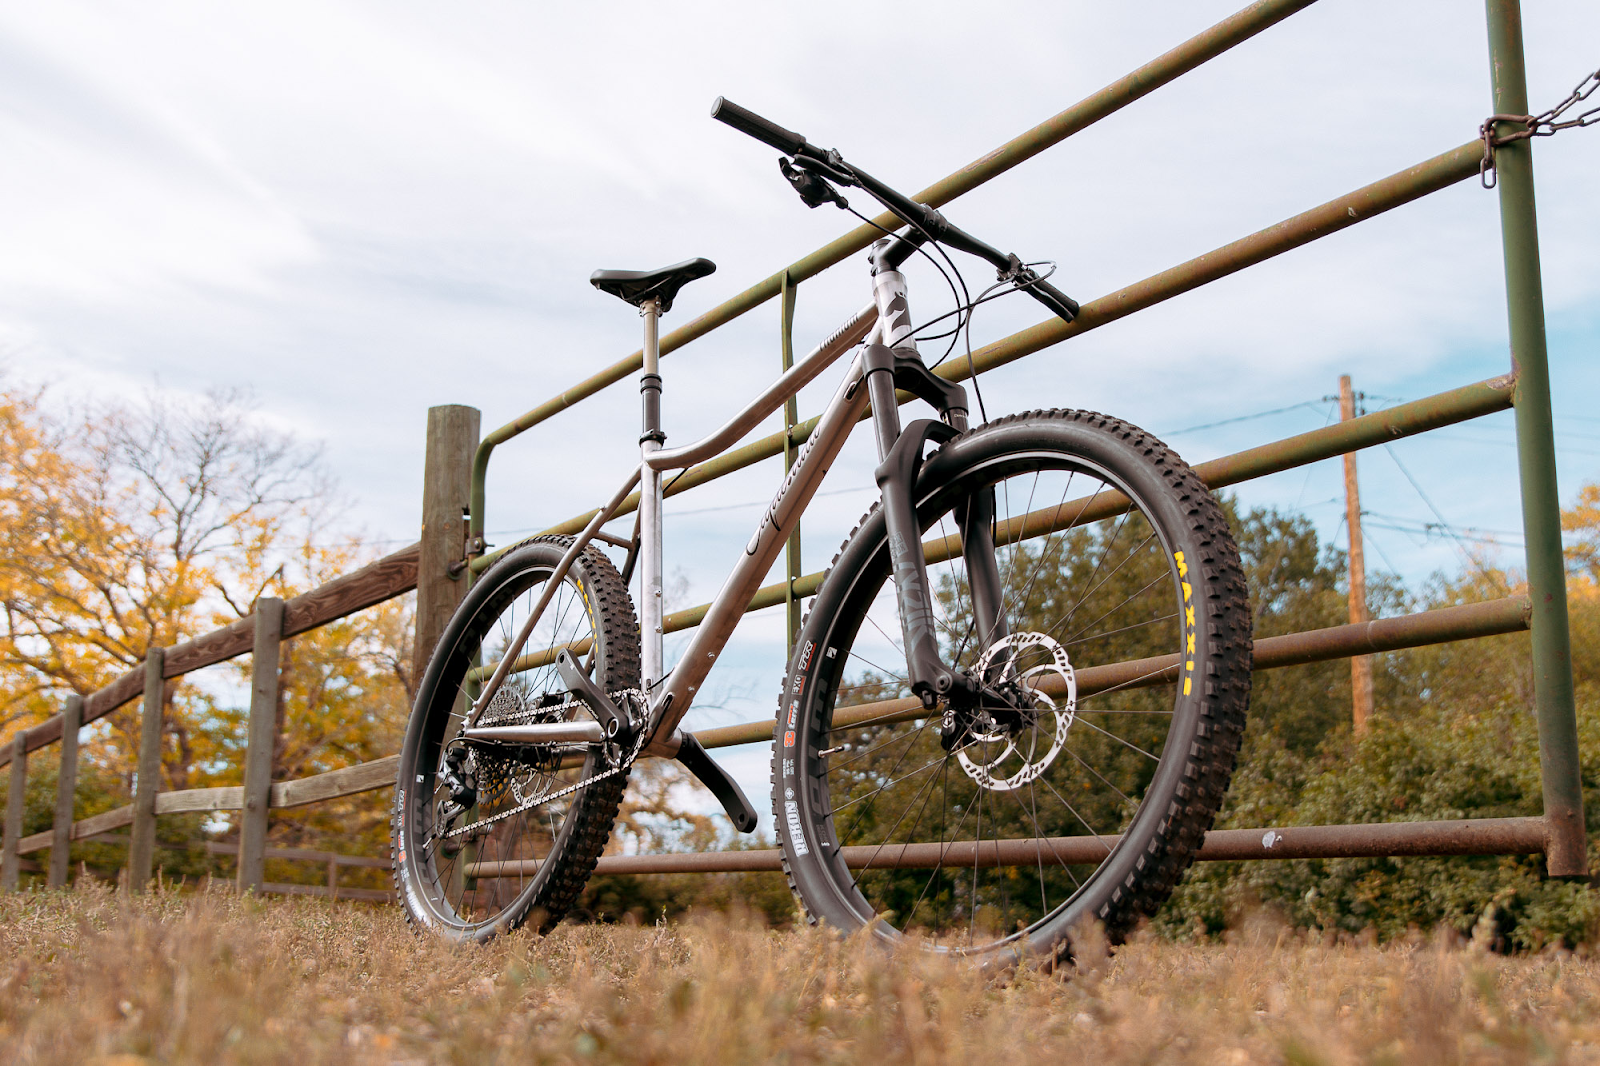 Steer 29 plus bike with flat handlebars leaning against a fence in autumn weather